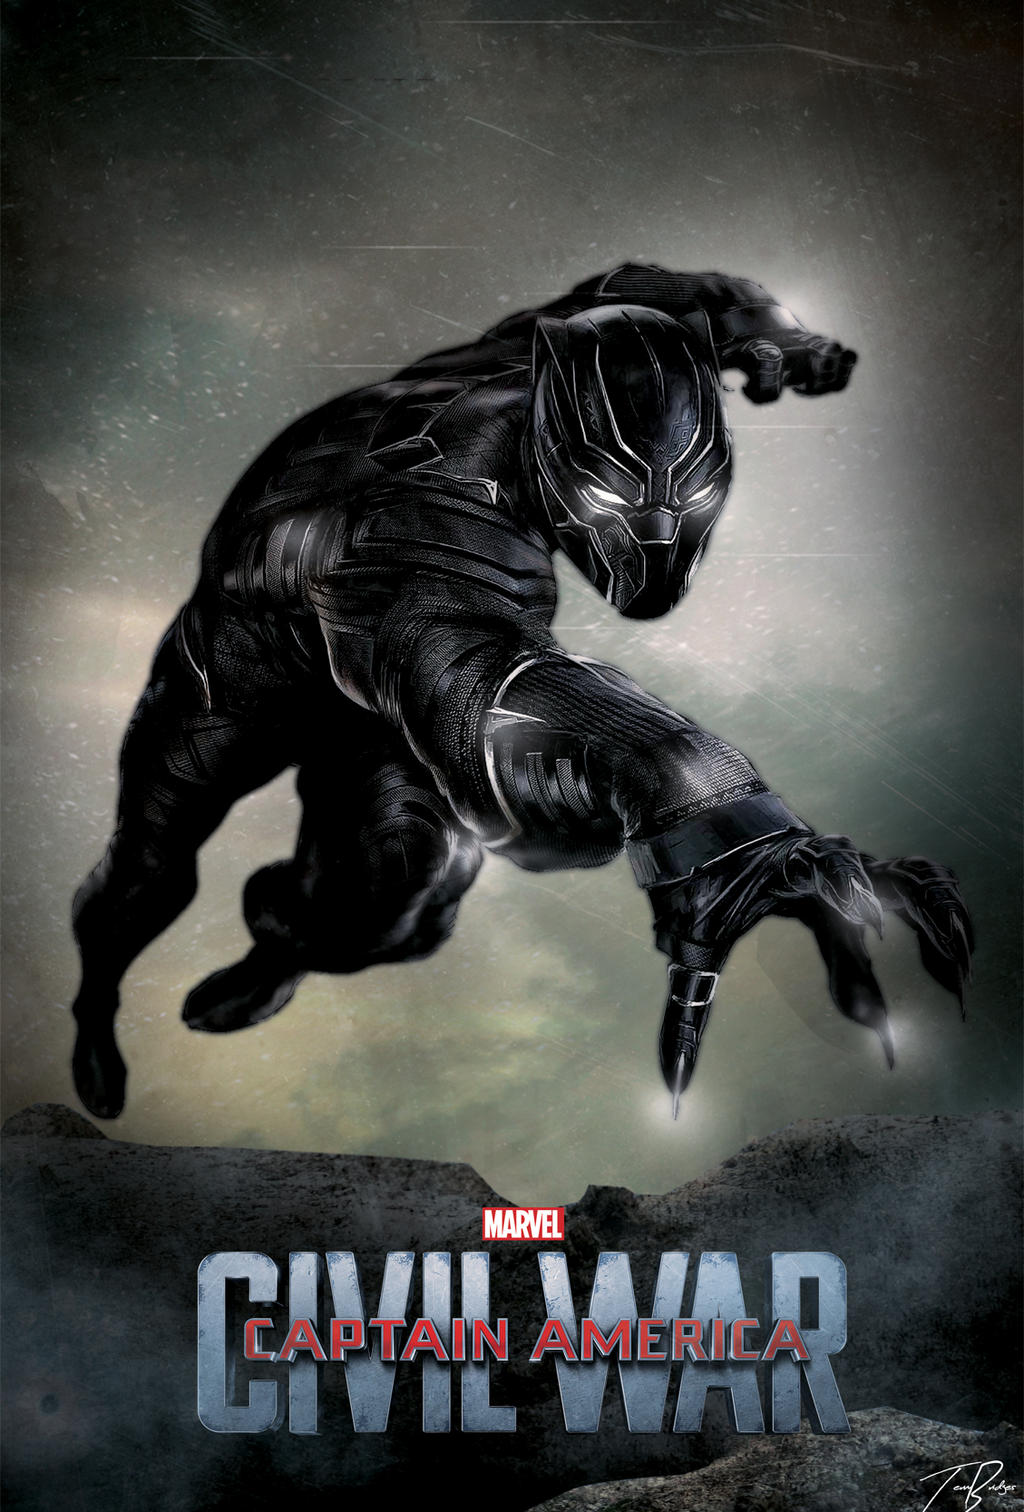 Captain America Civil War Poster Black Panther By HZ Designs On